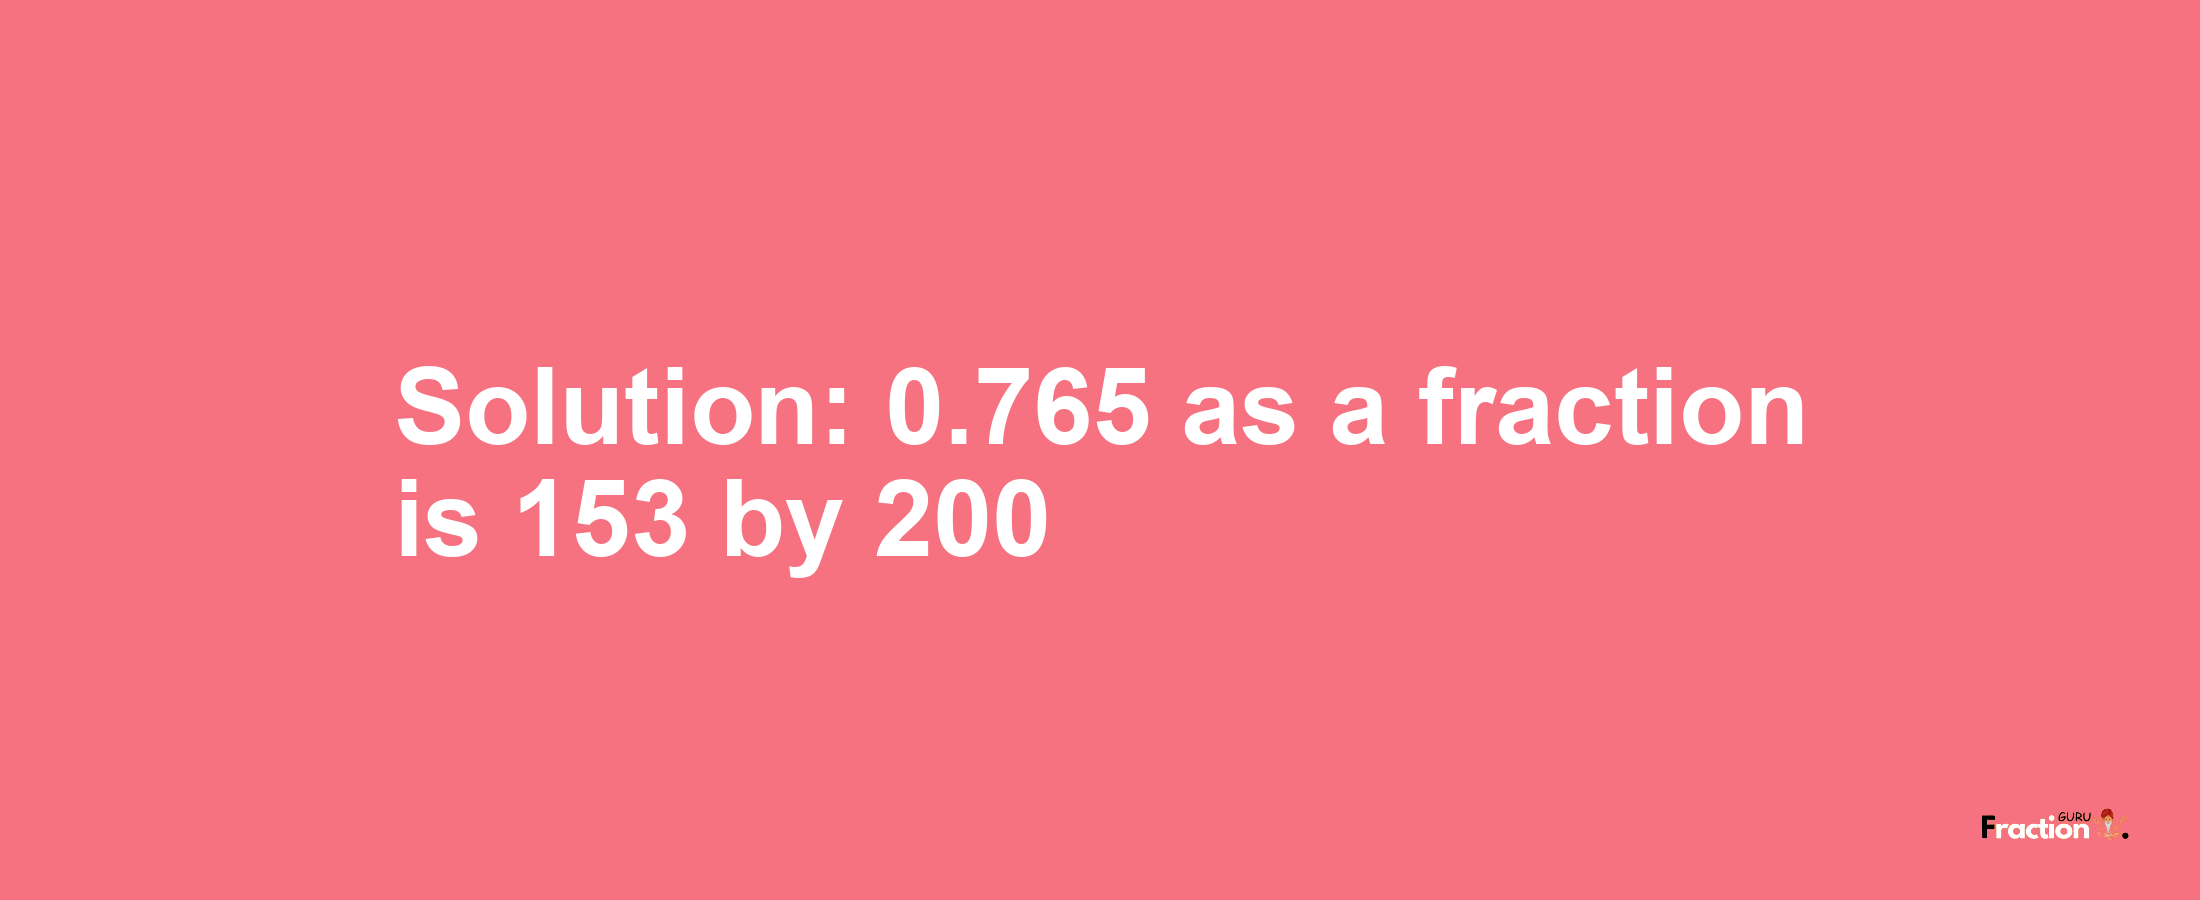 Solution:0.765 as a fraction is 153/200